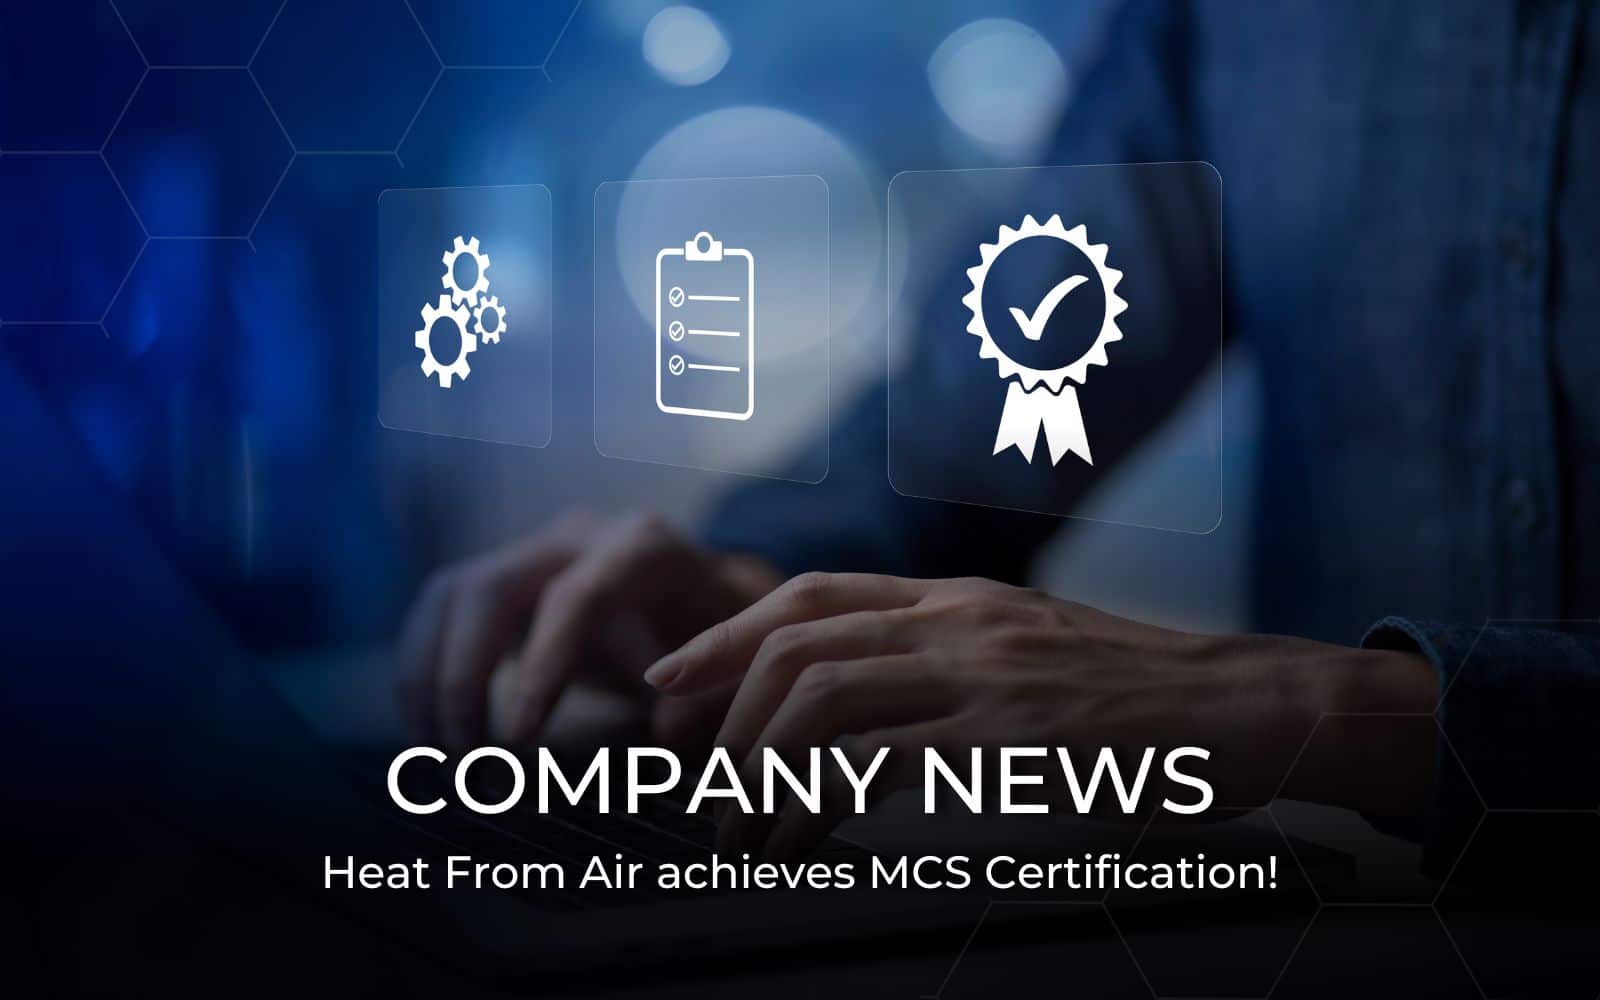 Heat From Air achieves MCS